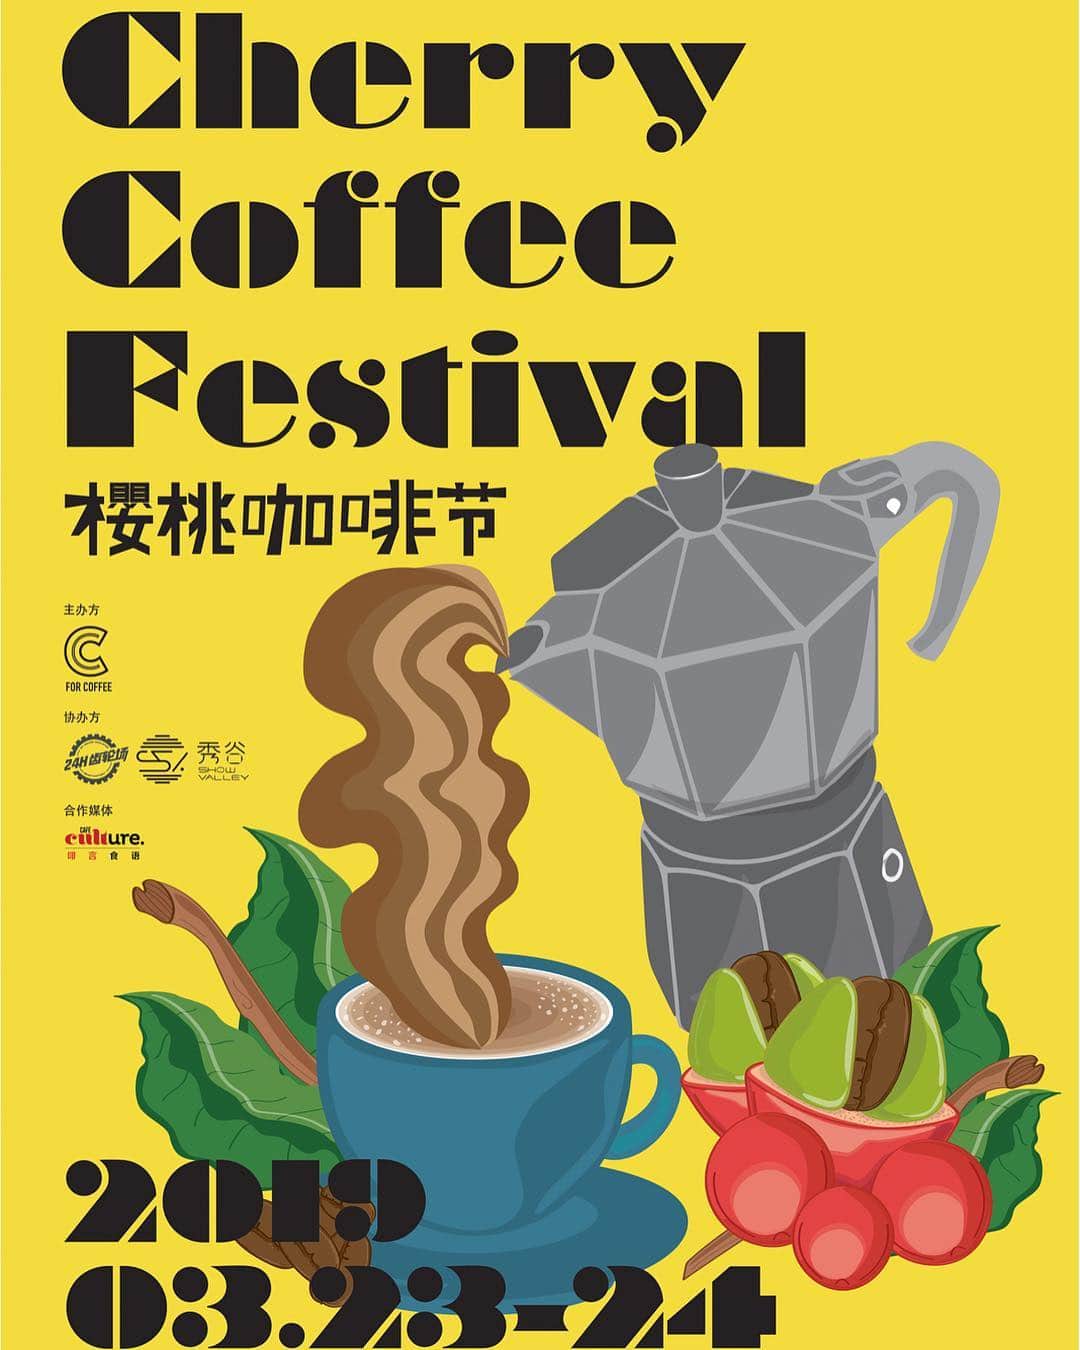 goodcoffeemeさんのインスタグラム写真 - (goodcoffeemeInstagram)「Hi guys! It’s a team Good Coffee.﻿ This weekend at the Cherry Coffee festival in Beijing, China,﻿ We will participate as THE LOCAL COFFEE STAND by Good Coffee!﻿ ﻿ We have coffee beans roasted by coffee roasters from all over Japan.﻿ Details are coming soon…﻿ ﻿ The team is looking forward to talk to you in China through coffee!﻿ ﻿ ﻿ 【Event Details】﻿ Date: March 23 (Sat), March 24 (Sun)﻿ Venue: 24H齿轮场﻿ Address: 北京市定福庄西里2号﻿ Time: 10:00〜18:00﻿ ———————————————————————﻿ こんにちは！チームGood Coffeeです。﻿ 今週末に中国・北京で開催される、Cherry Coffee festival に﻿ THE LOCAL COFFEE STAND by Good Coffeeとして参加します！﻿ ﻿ 日本各地のコーヒーロースターさんに焼いていただいたコーヒー豆をお持ちします。﻿ 詳細はまた別途。﻿ ﻿ コーヒーを通じて中国のみなさんとお話しできることを、チーム一同楽しみにしています！﻿ ﻿ 【イベント詳細】﻿ Cherry Coffee festival ﻿ 日程：3月23（土）、3月24日（日）﻿ 会場：24H齿轮场﻿ 住所：北京市定福庄西里2号﻿ 時間：10:00〜18:00」3月21日 23時18分 - goodcoffeeme